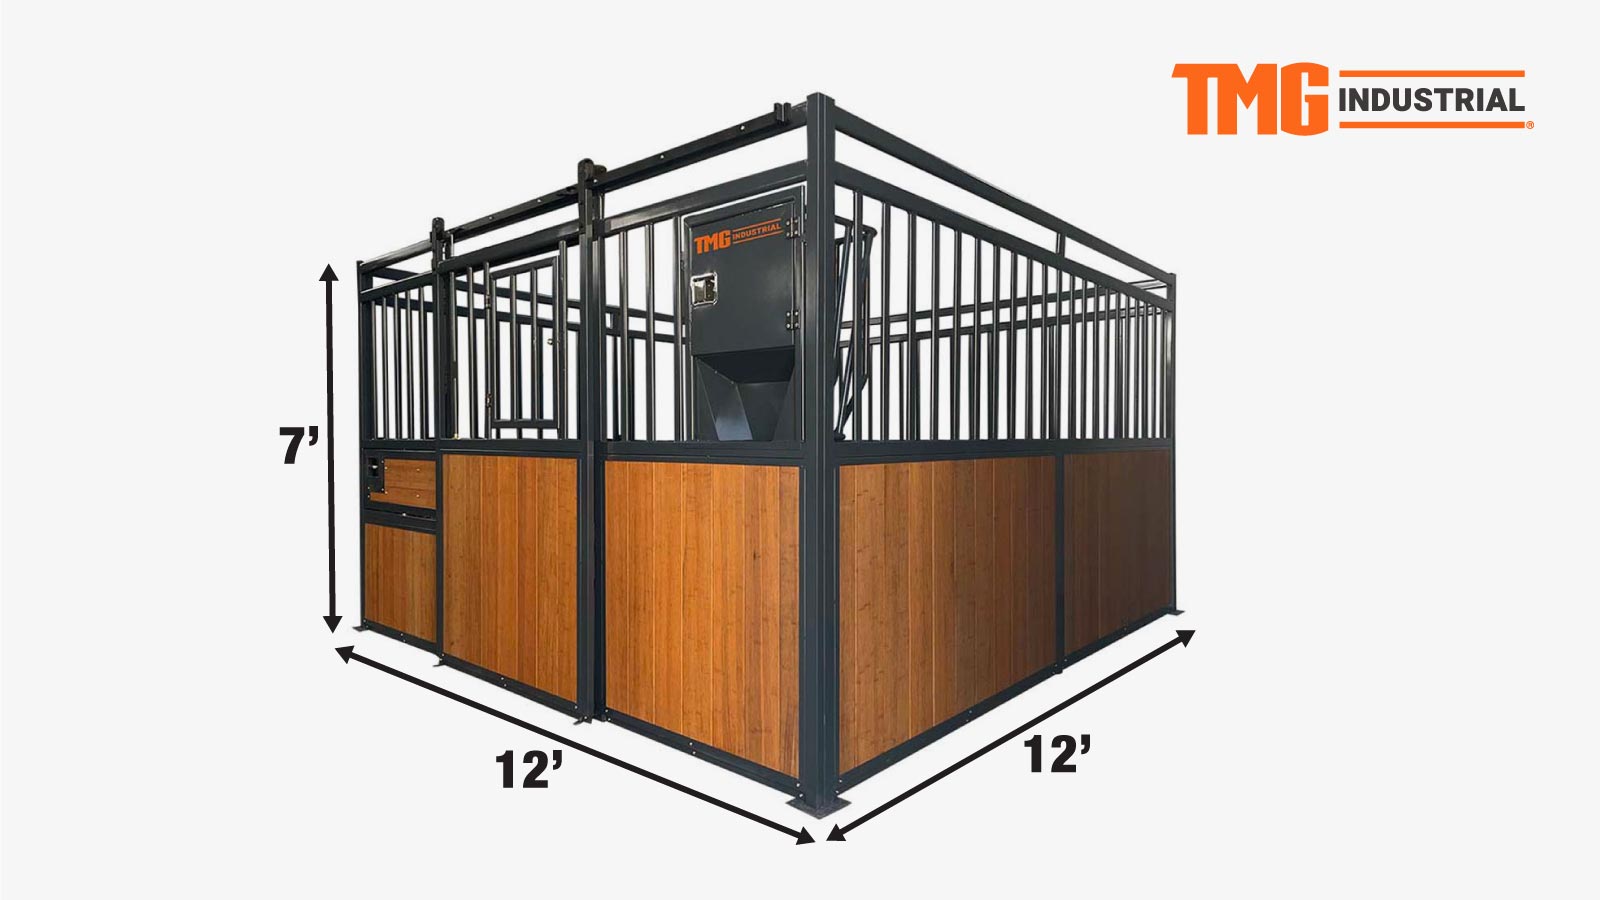 TMG Industrial 12’ x 12’ Horse Stall Set w/Pine Lumber Boards, Vertical Bar Top & Wood-Filled Bottom, Window/Feeder Opening, Front Sliding Door, TMG-FHS12-specifications-image